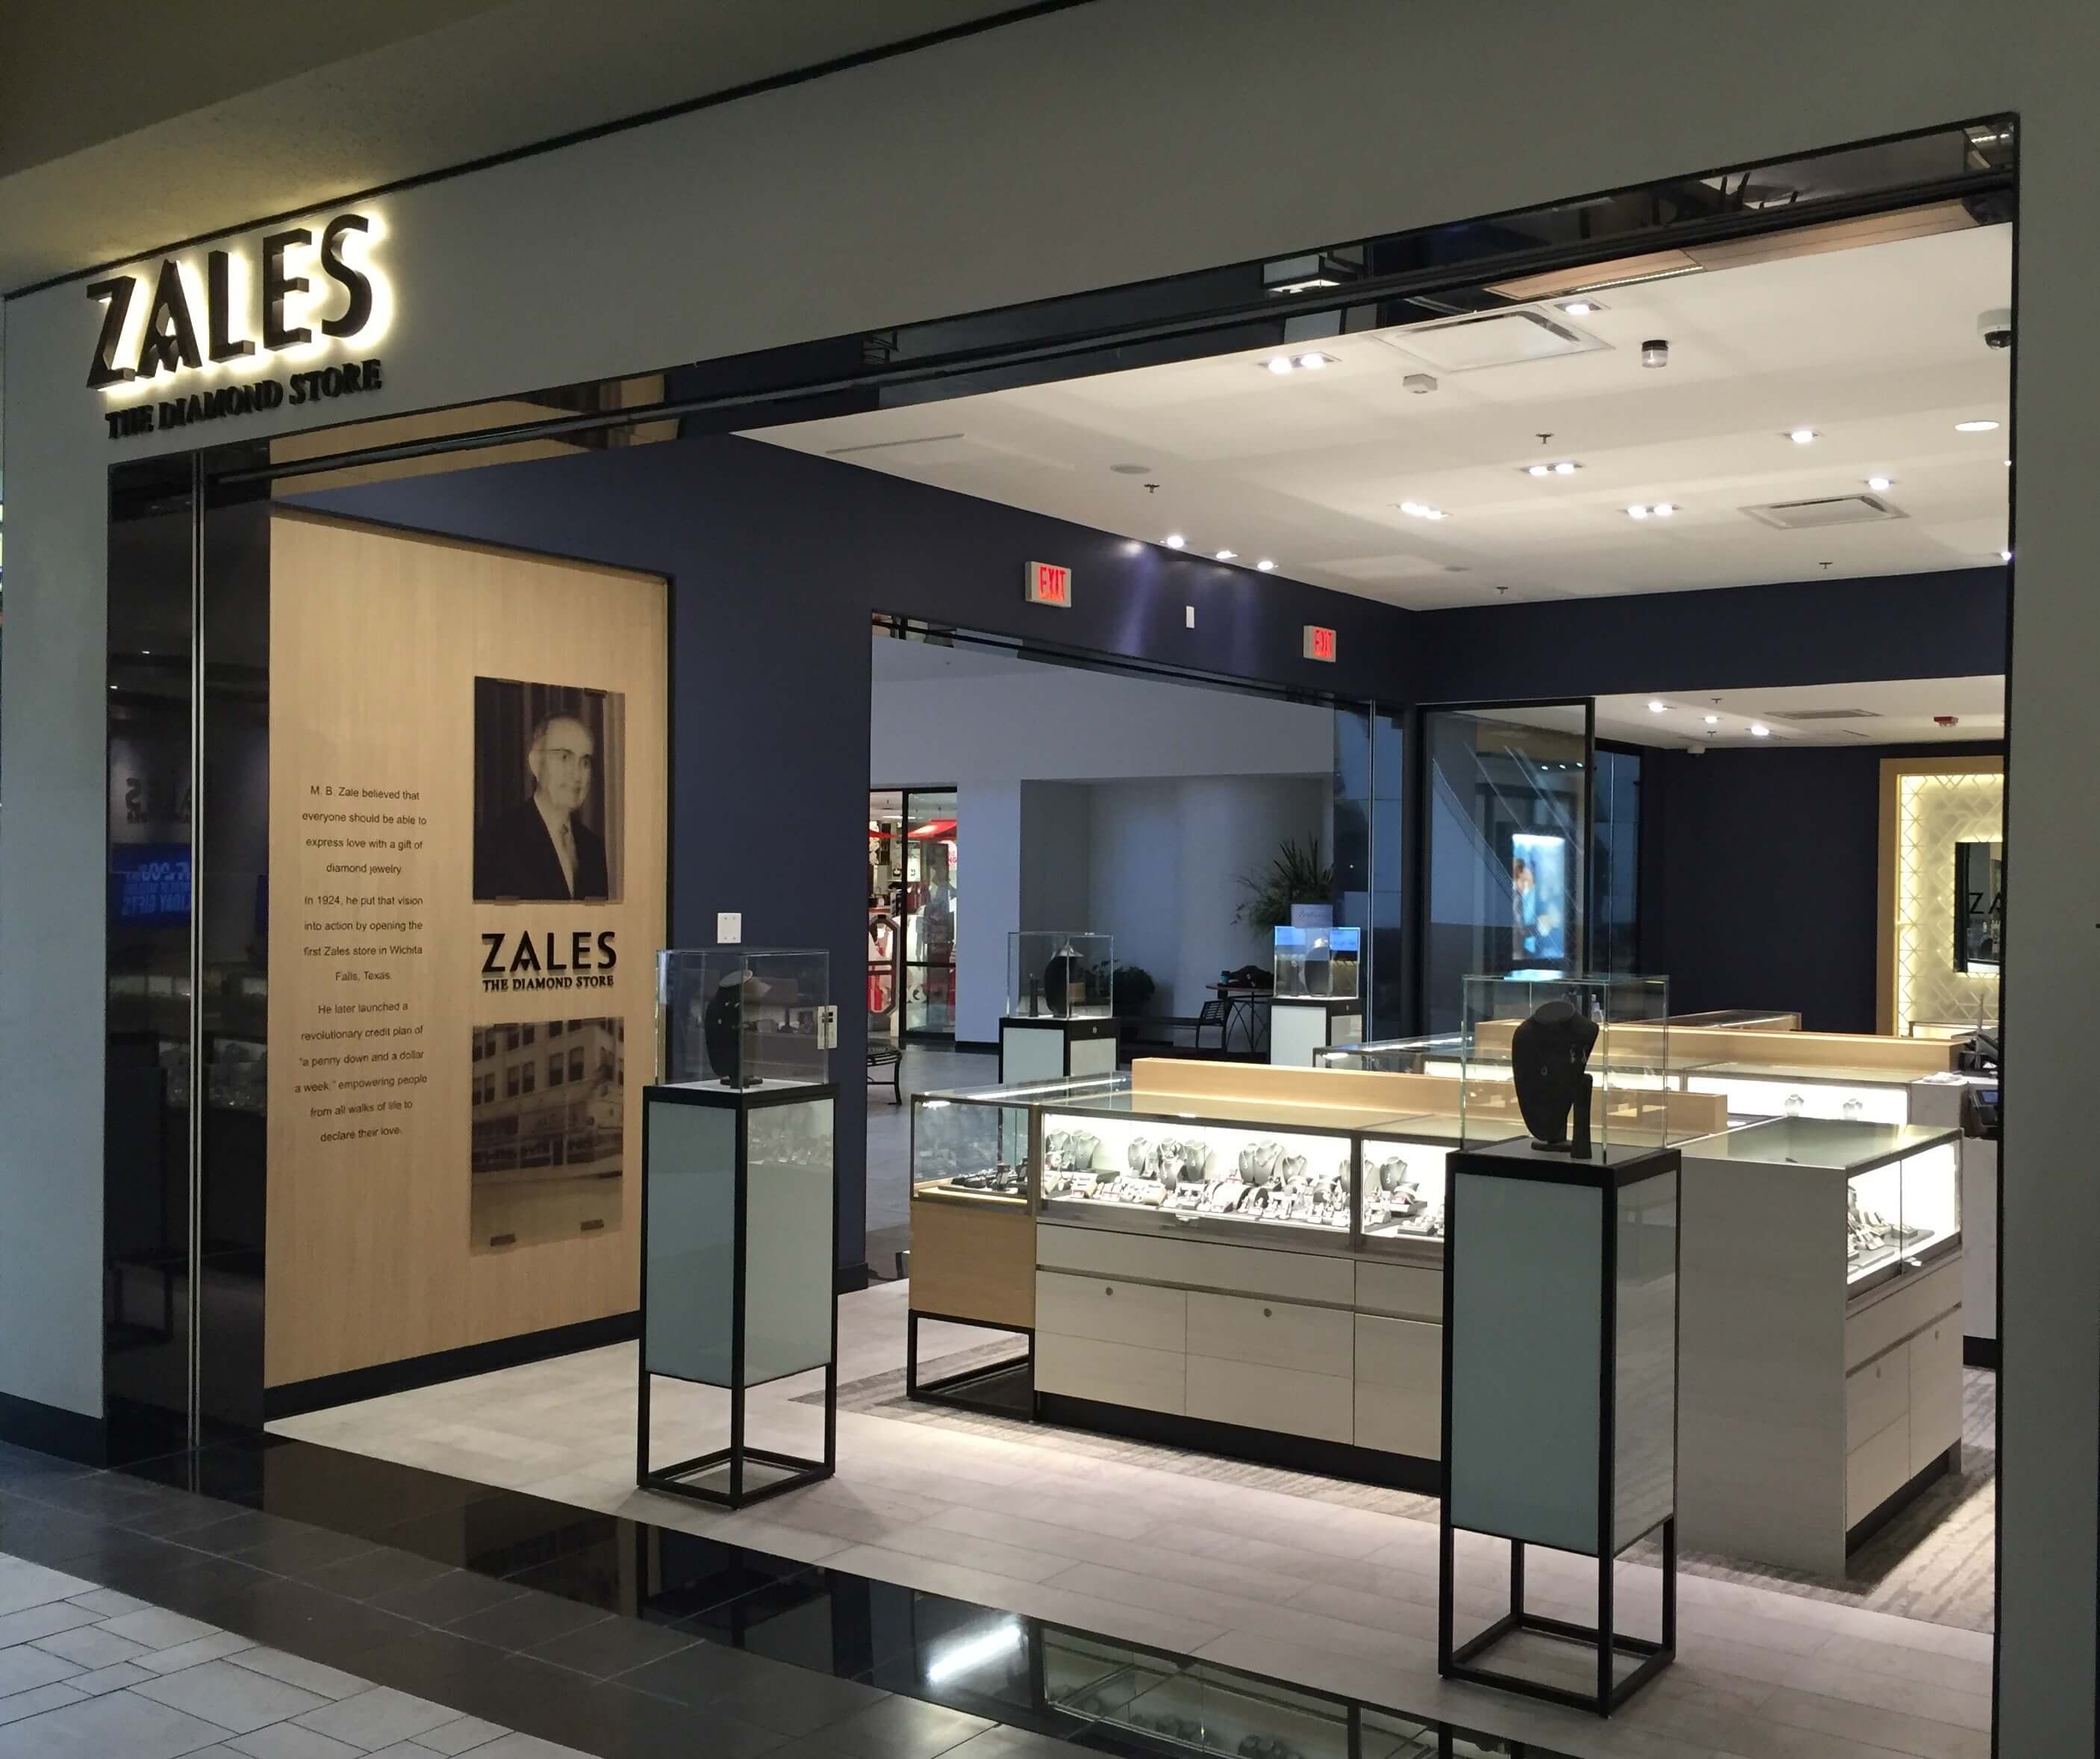 overrated companies - zales jewelry store near me - Zales The Diamond Store 109 M. B. Zale believed that everyone should be able to express love with a gift of diamond jewelry In 1924, he put that vision into action by opening the first Zales store in Wic